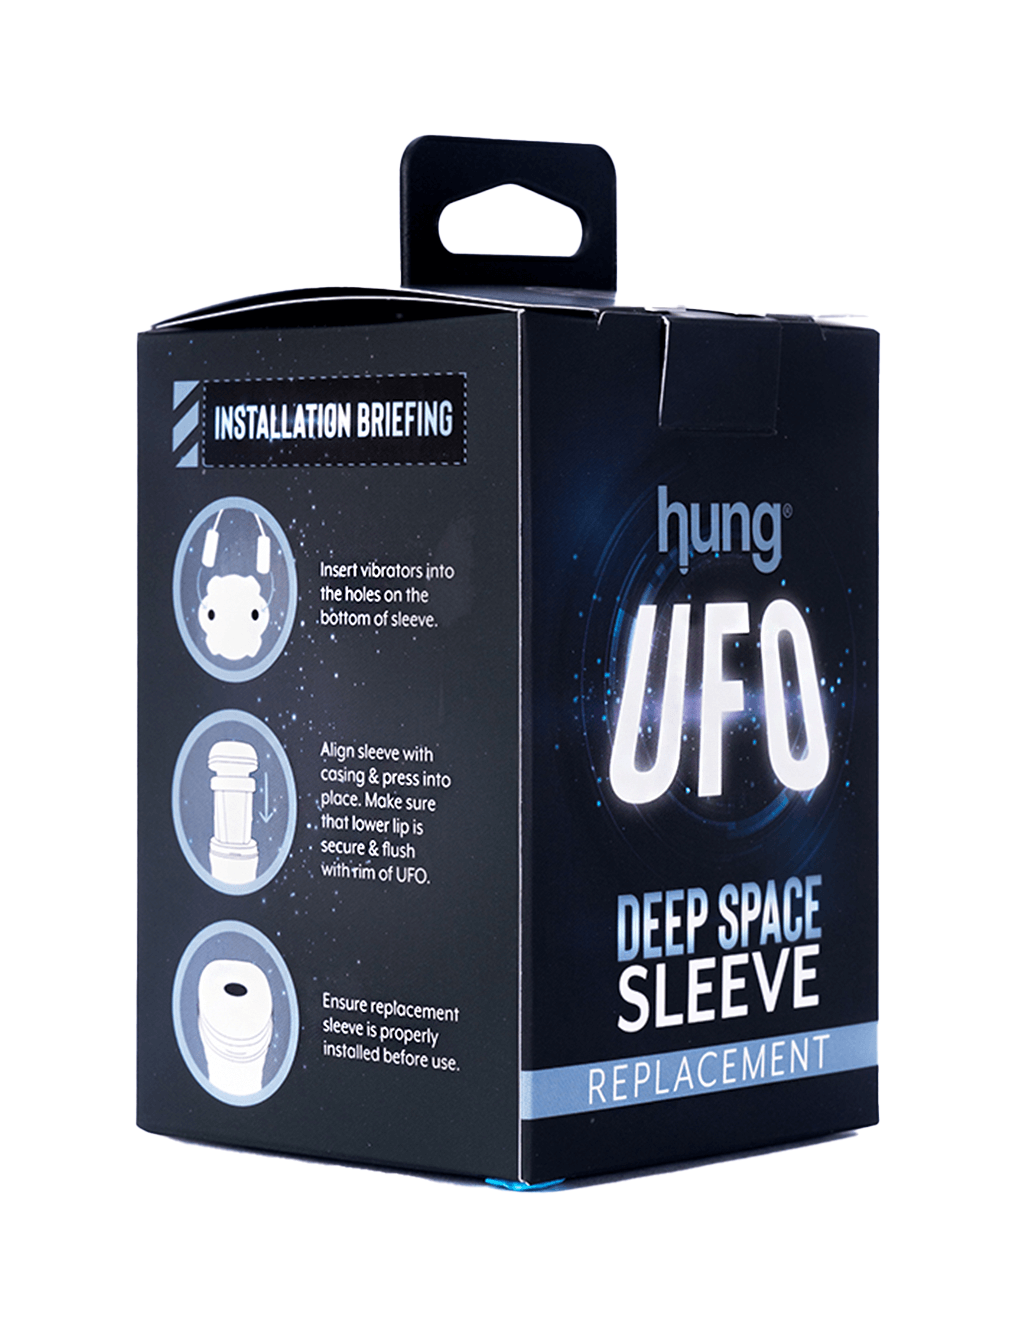 Hung UFO Replacement Sleeve - Box Side Angle 1